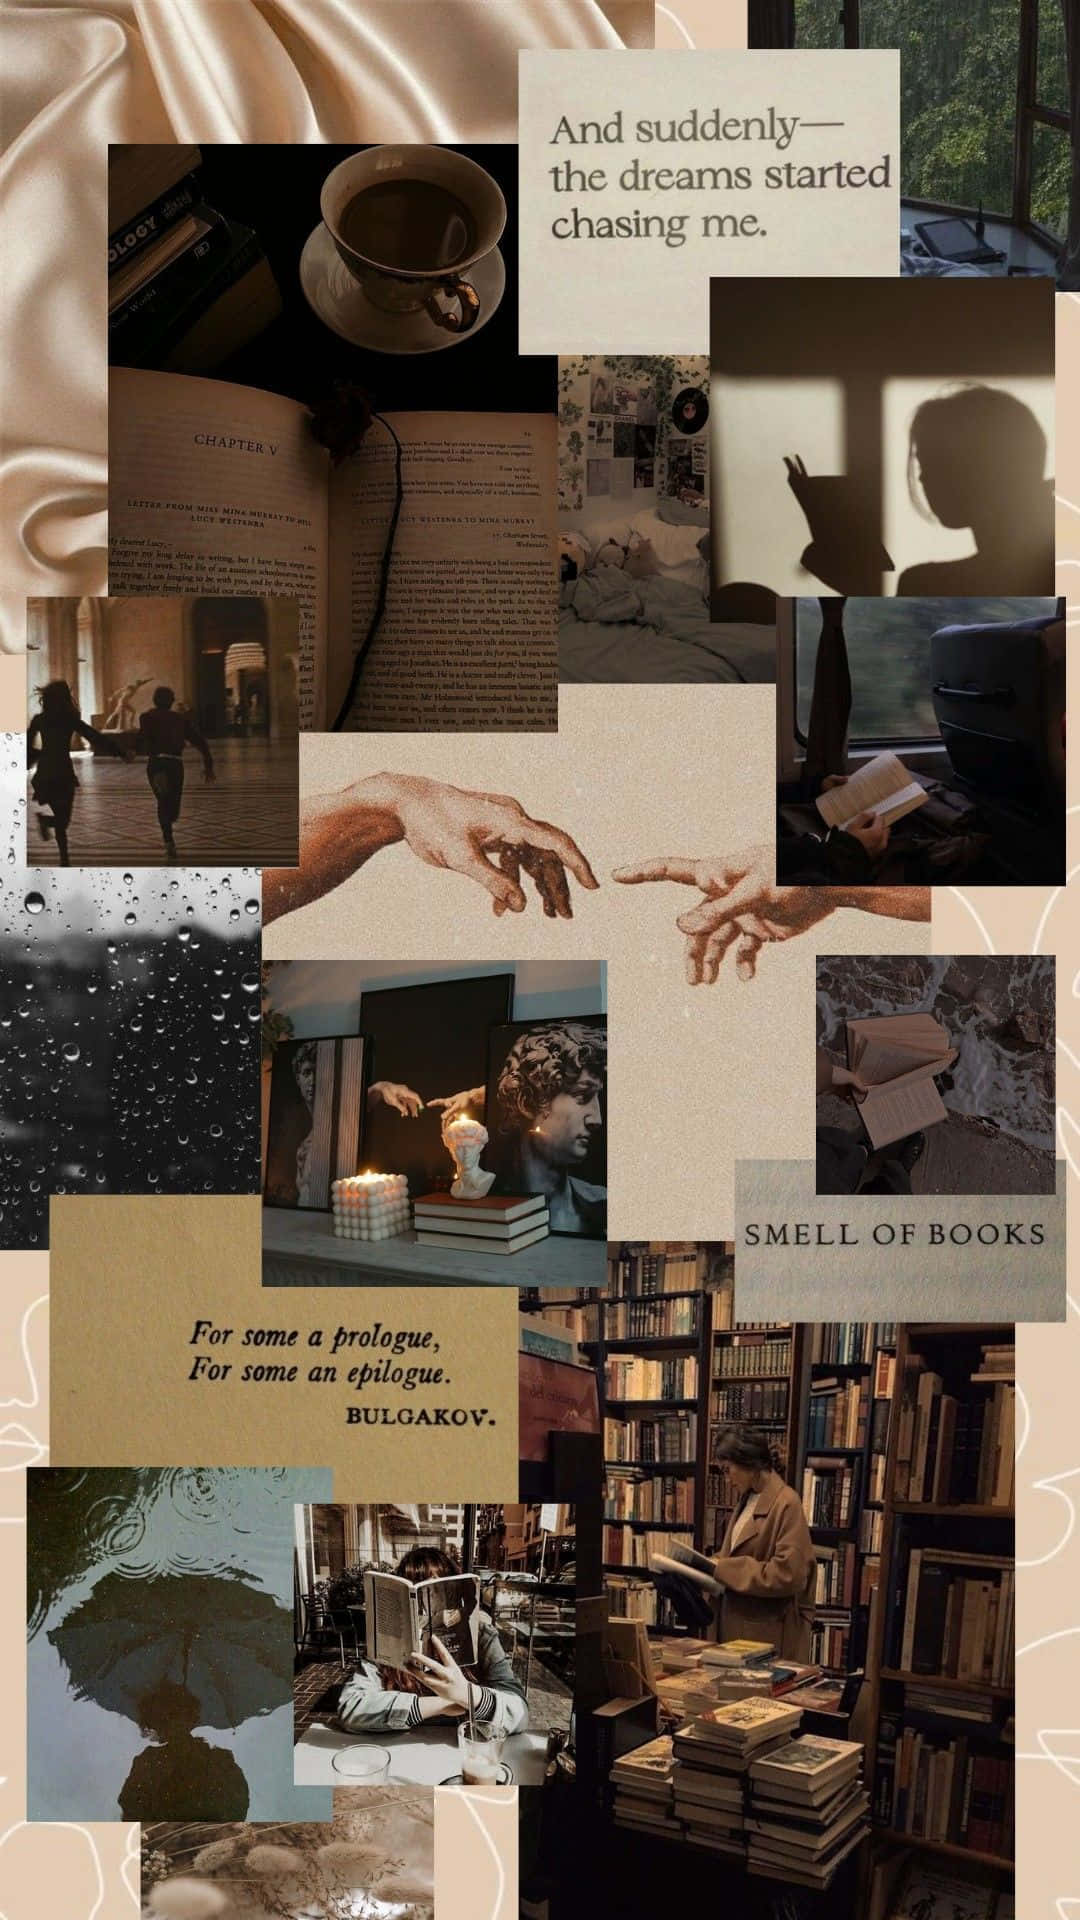 A Collage Of Pictures Of Books And People